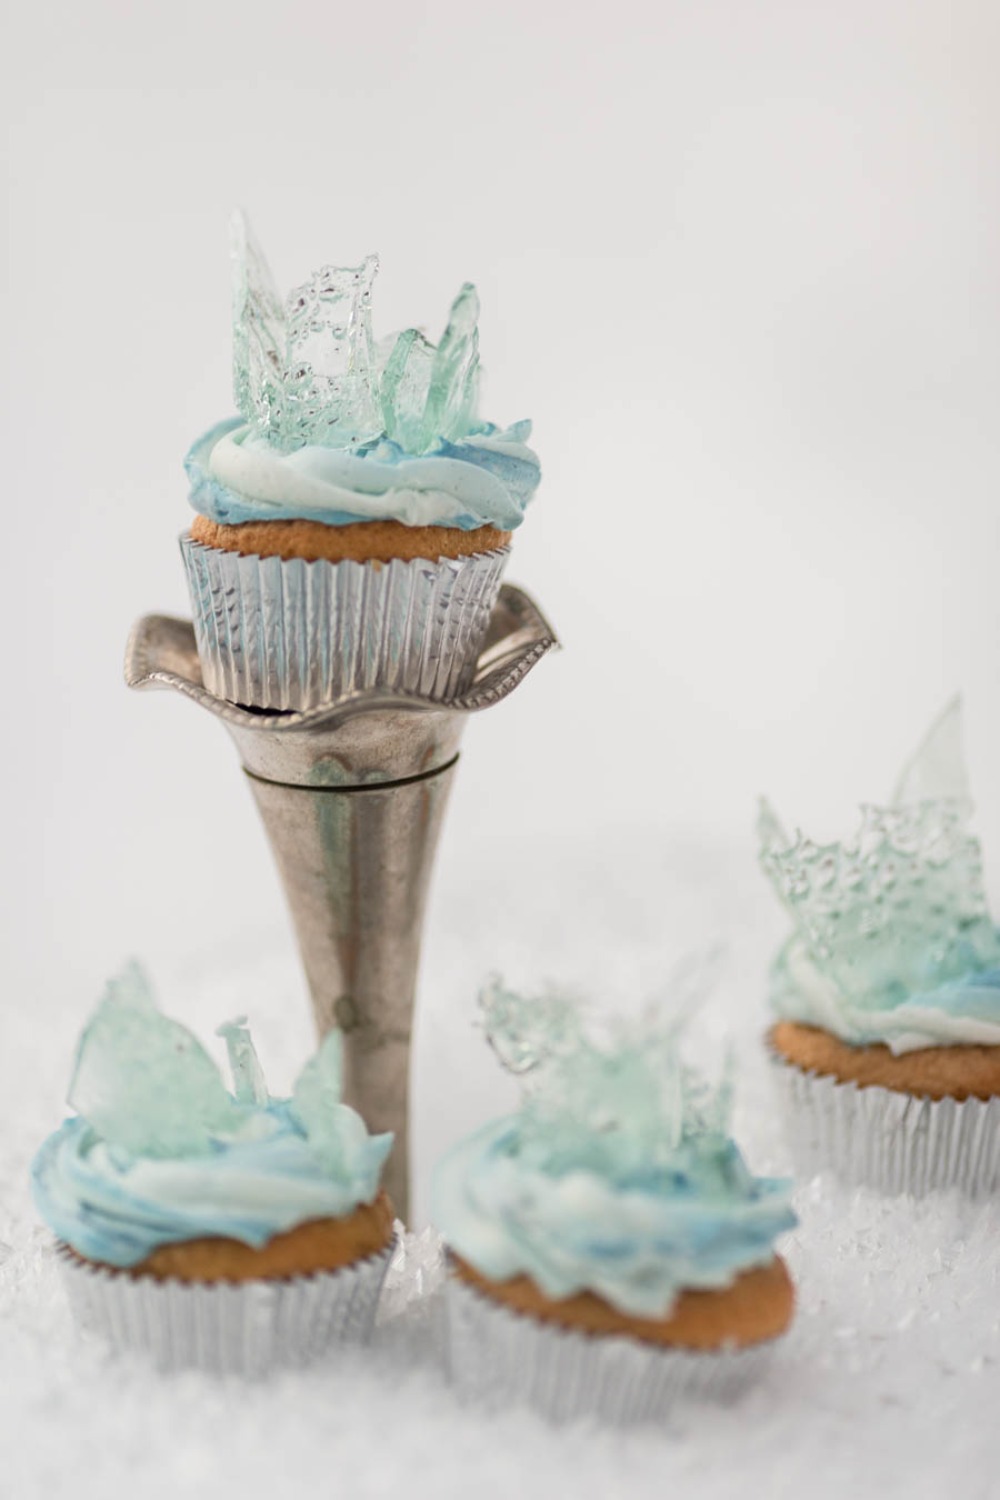 Frozen themed wedding cupcakes with blue icing and clear blue shards on top look fantastic